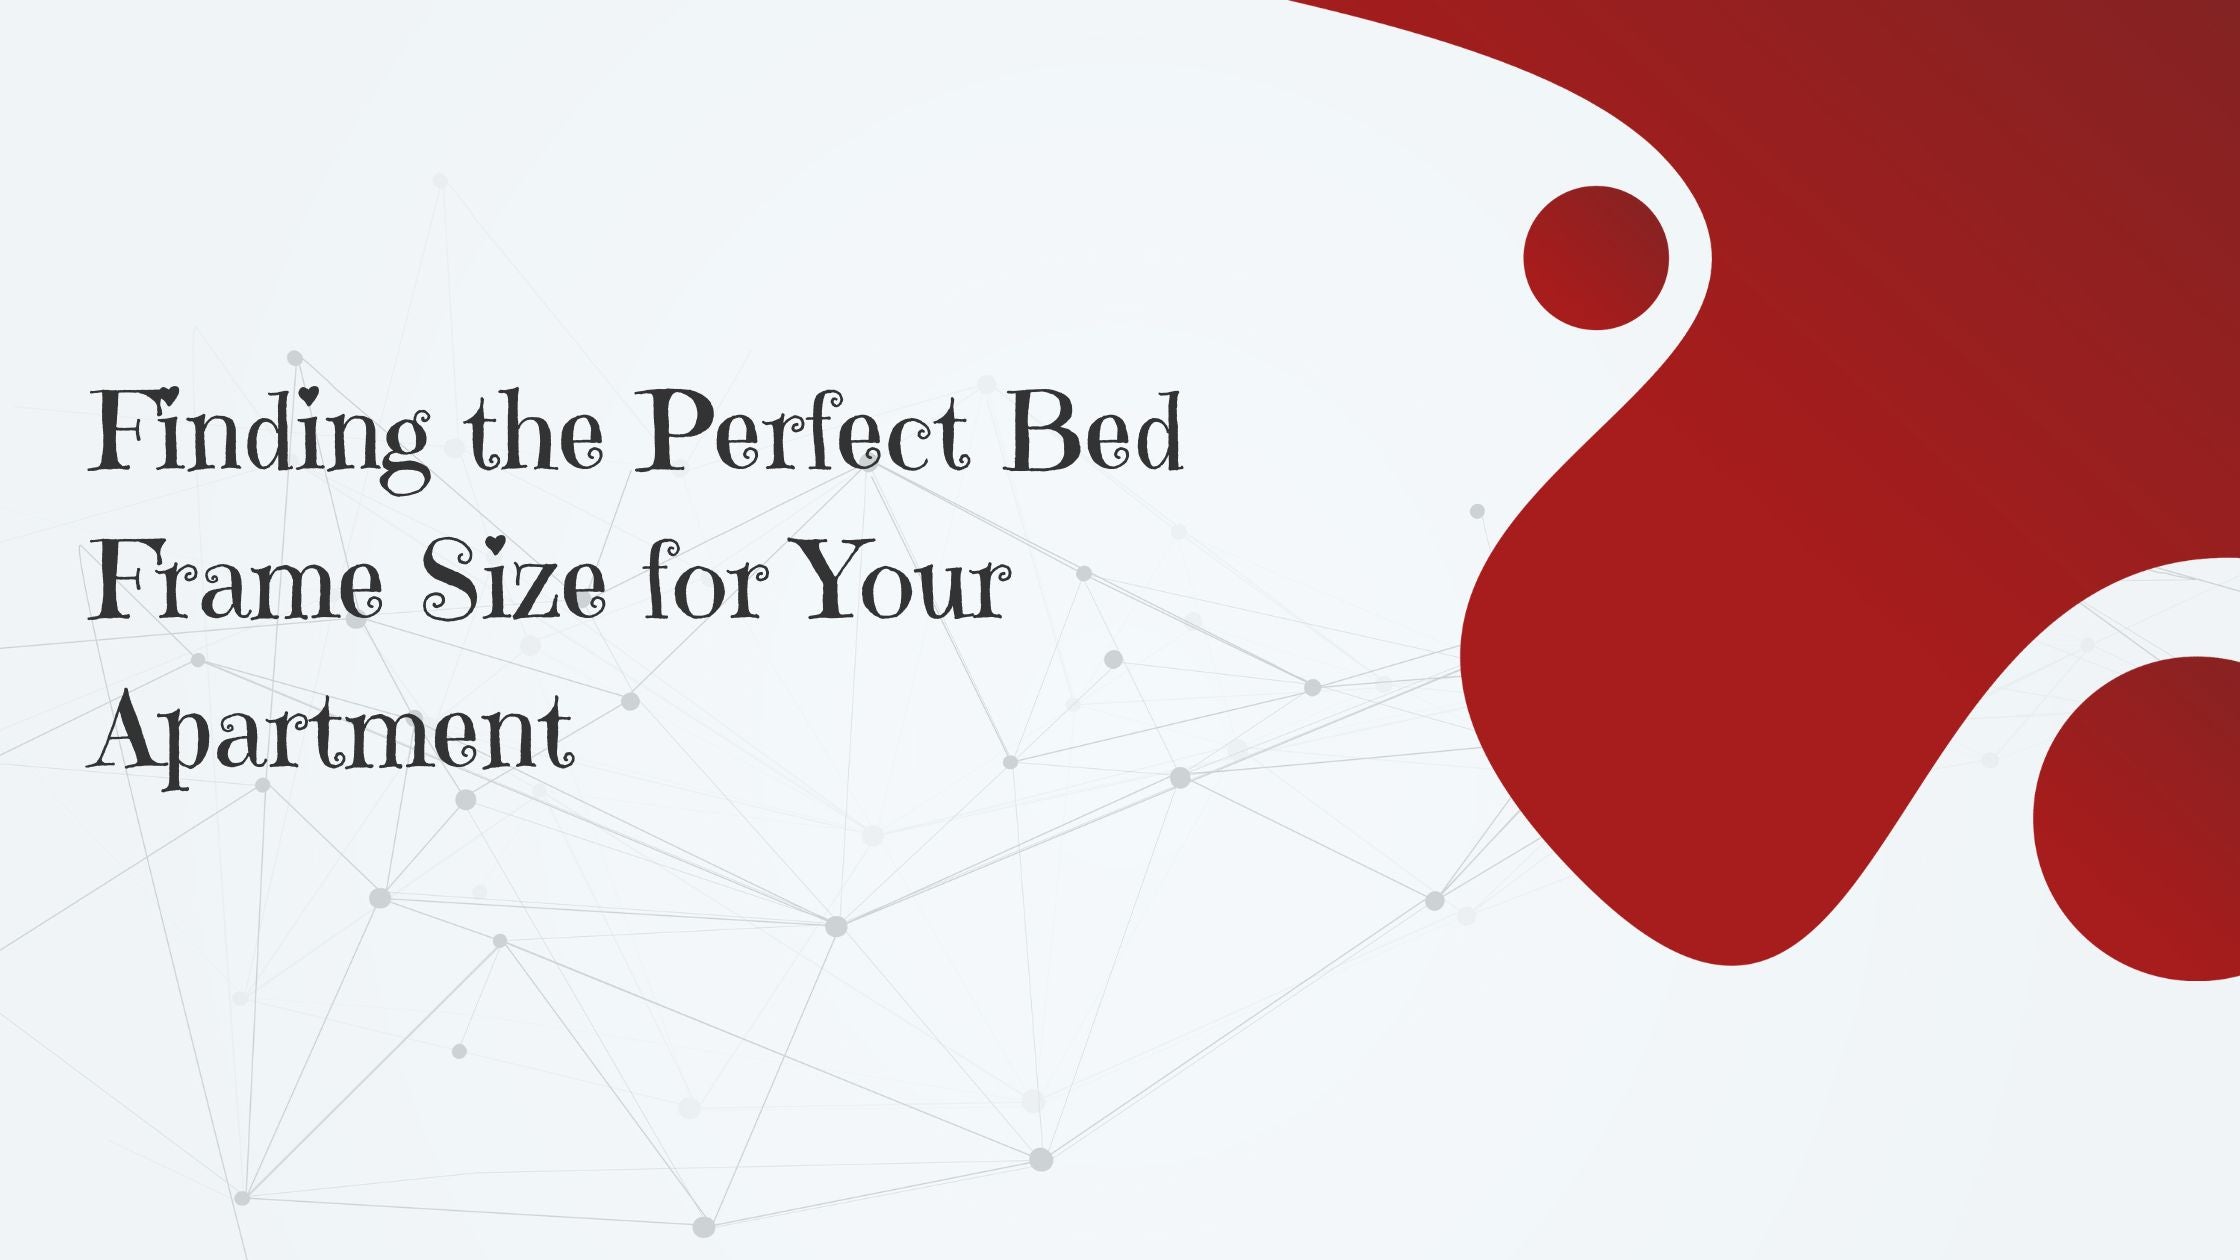 Finding the Perfect Bed Frame Size for Your Apartment